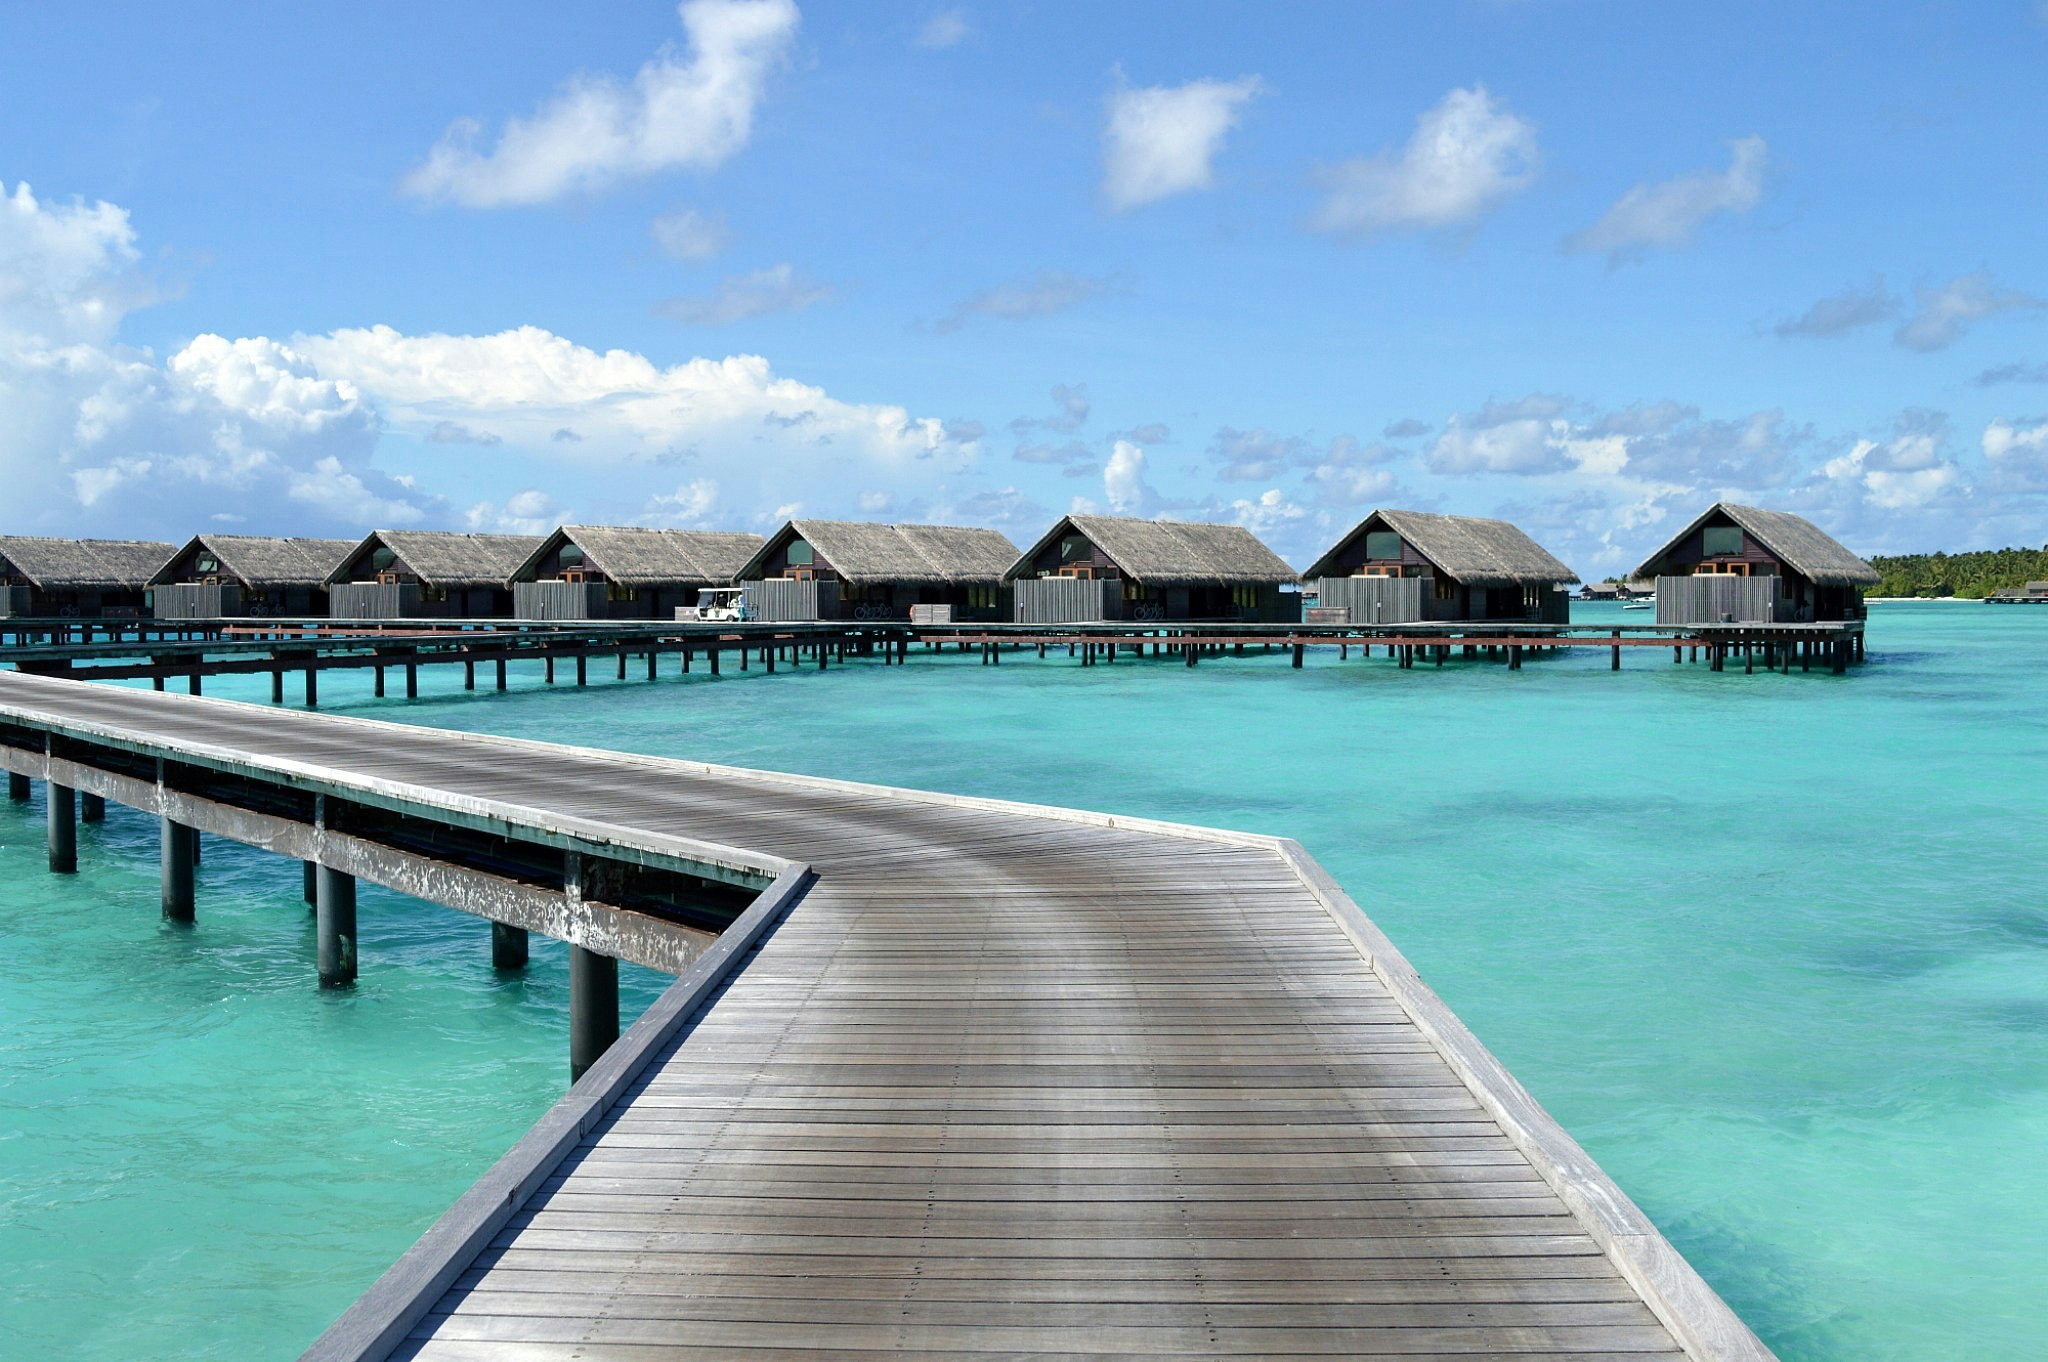 A wooden boardwalk stretches out towards a row of wooden overwater villas above clear blue water.